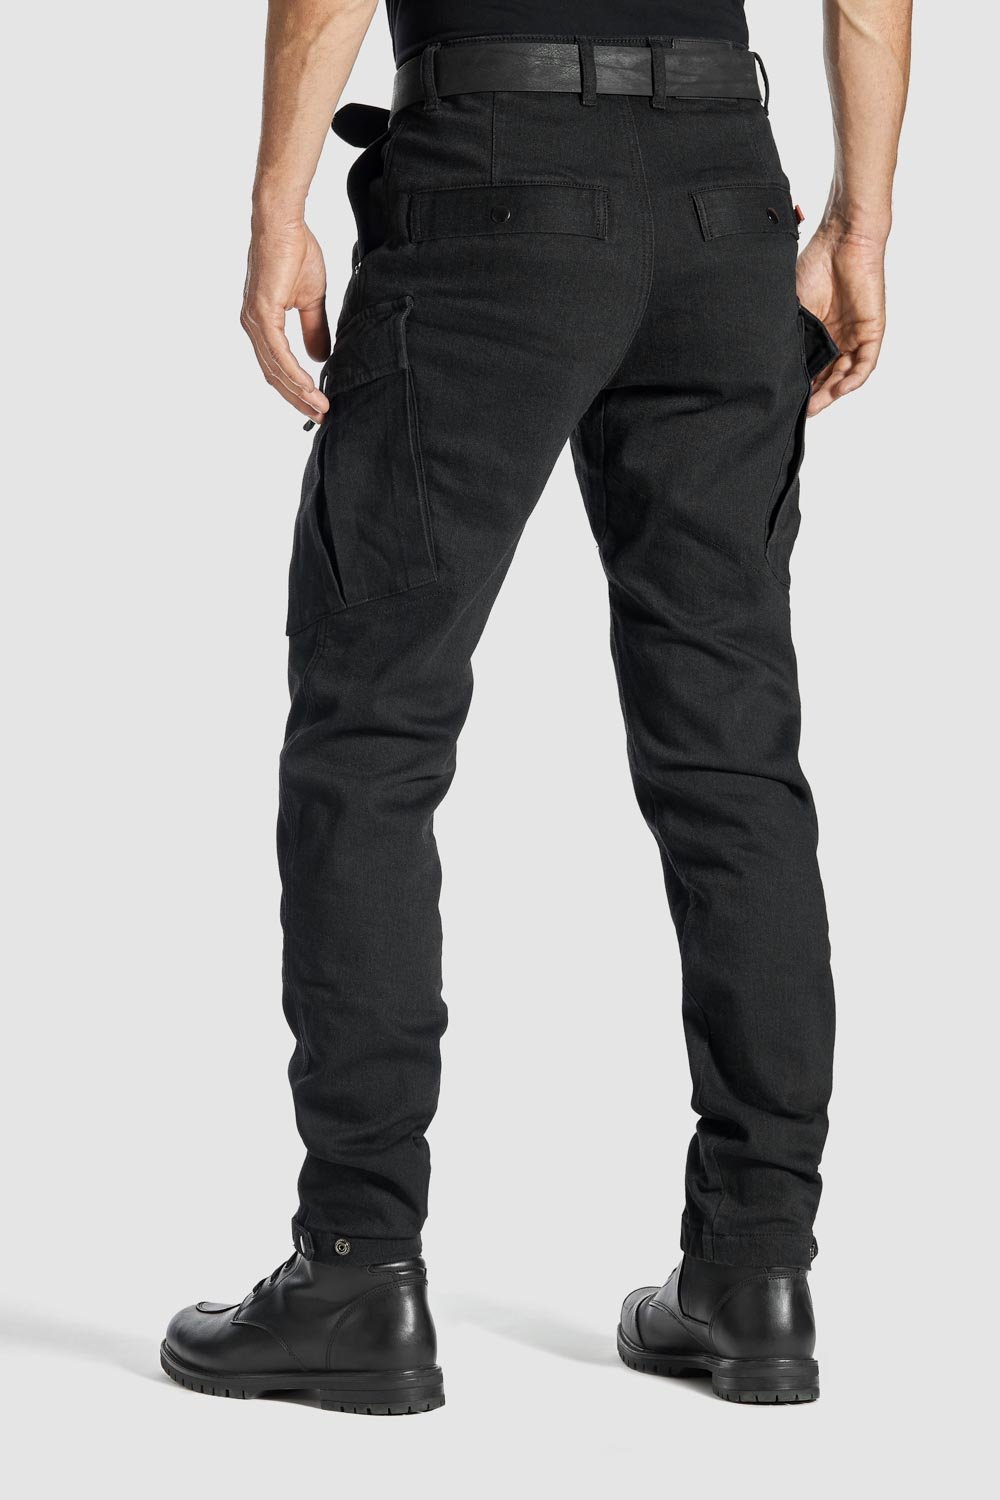 MARK KEV 01 – Motorcycle Jeans for Men with Chino Style Cordura® 2